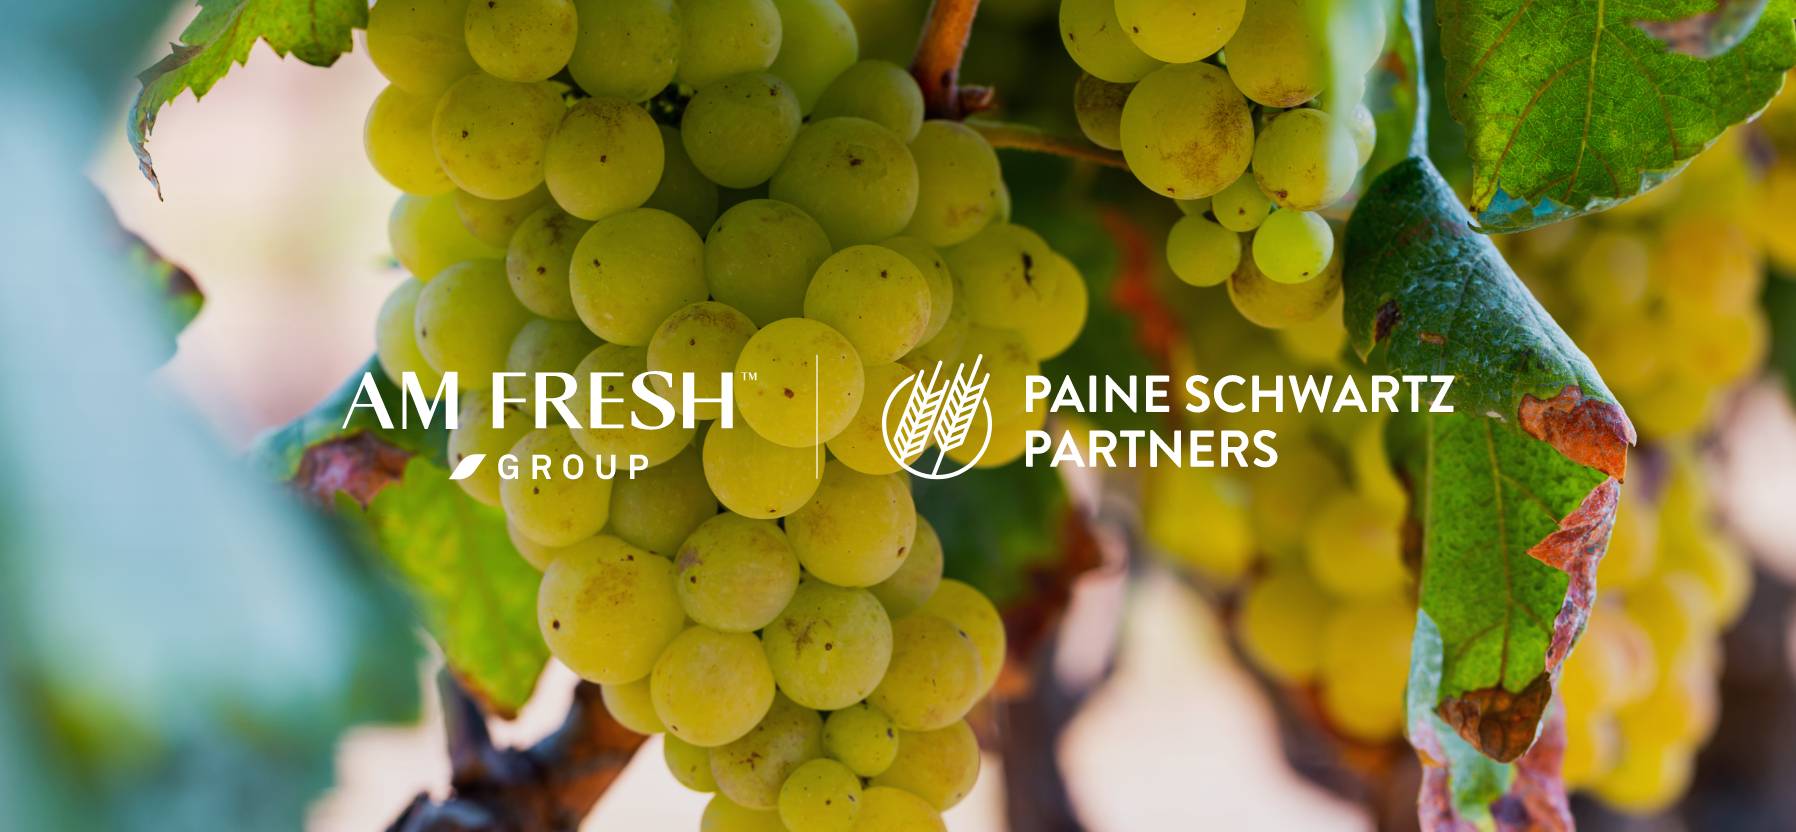 AM FRESH Group and Paine Schwartz Partners Announce Joint Investment to Consolidate Leading End-To-End Table Grape Company@2x